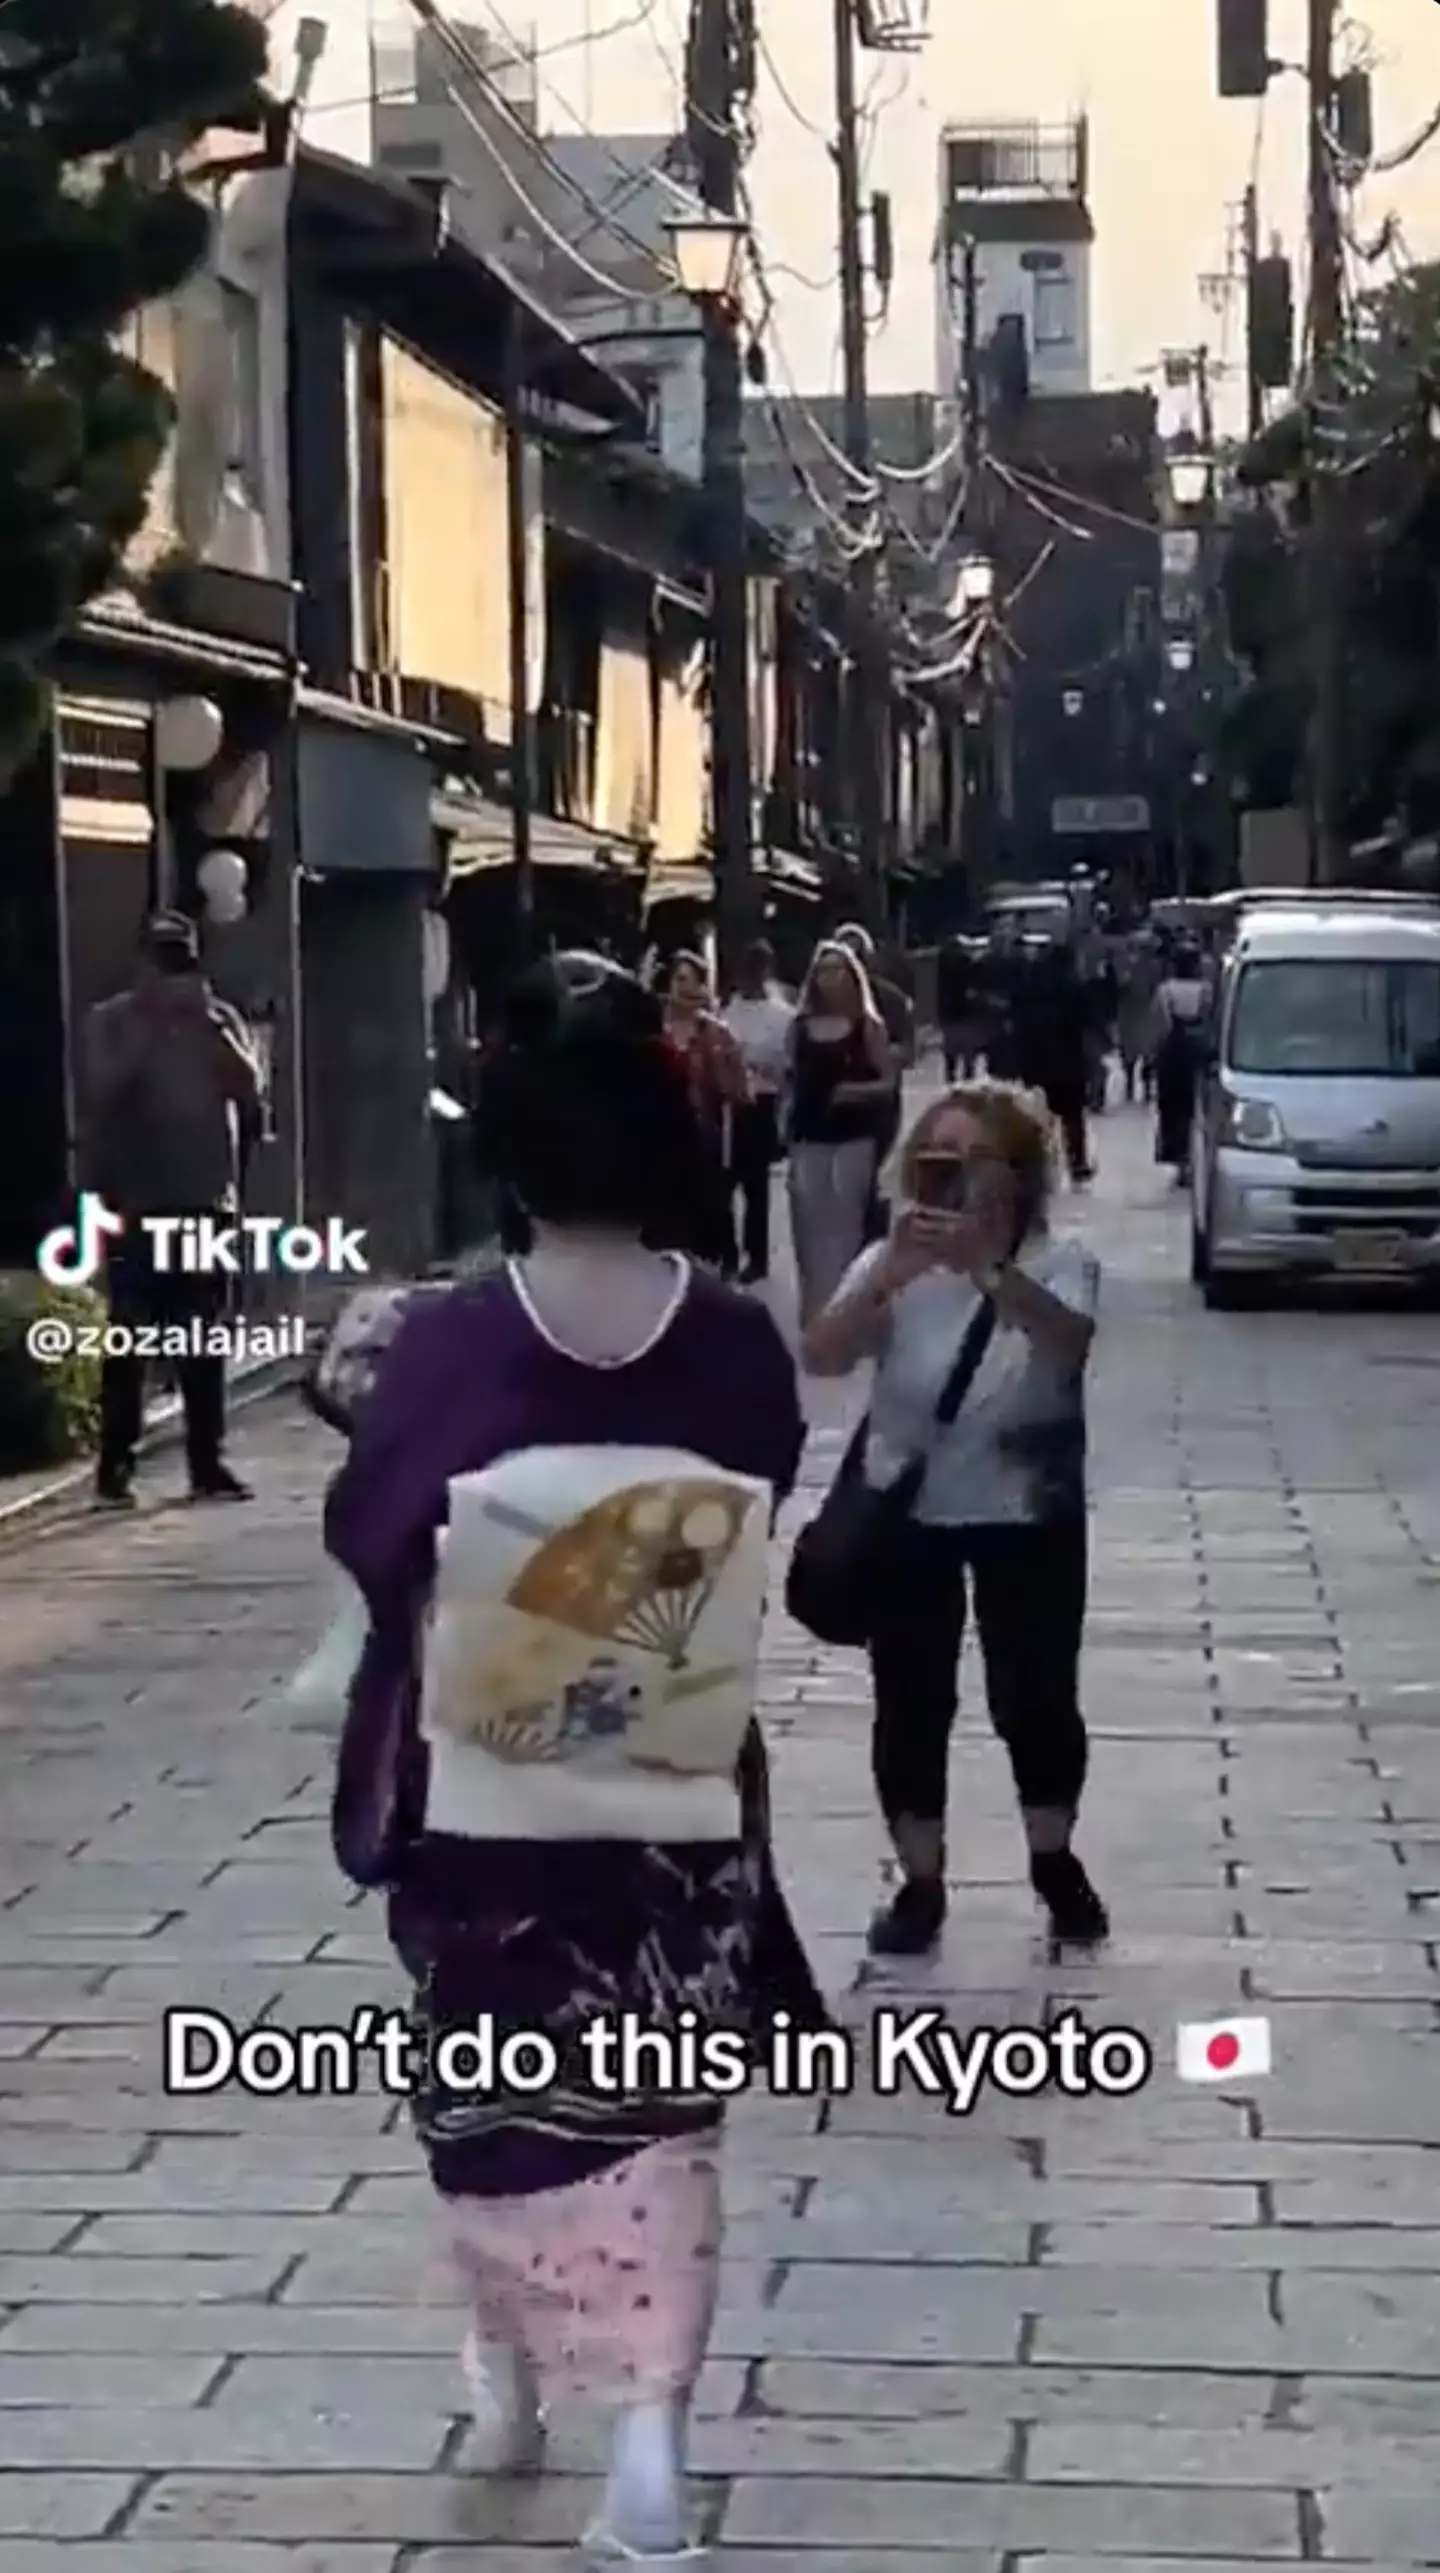 The tourist hassled the woman repeatedly. (TikTok / zozalajail)